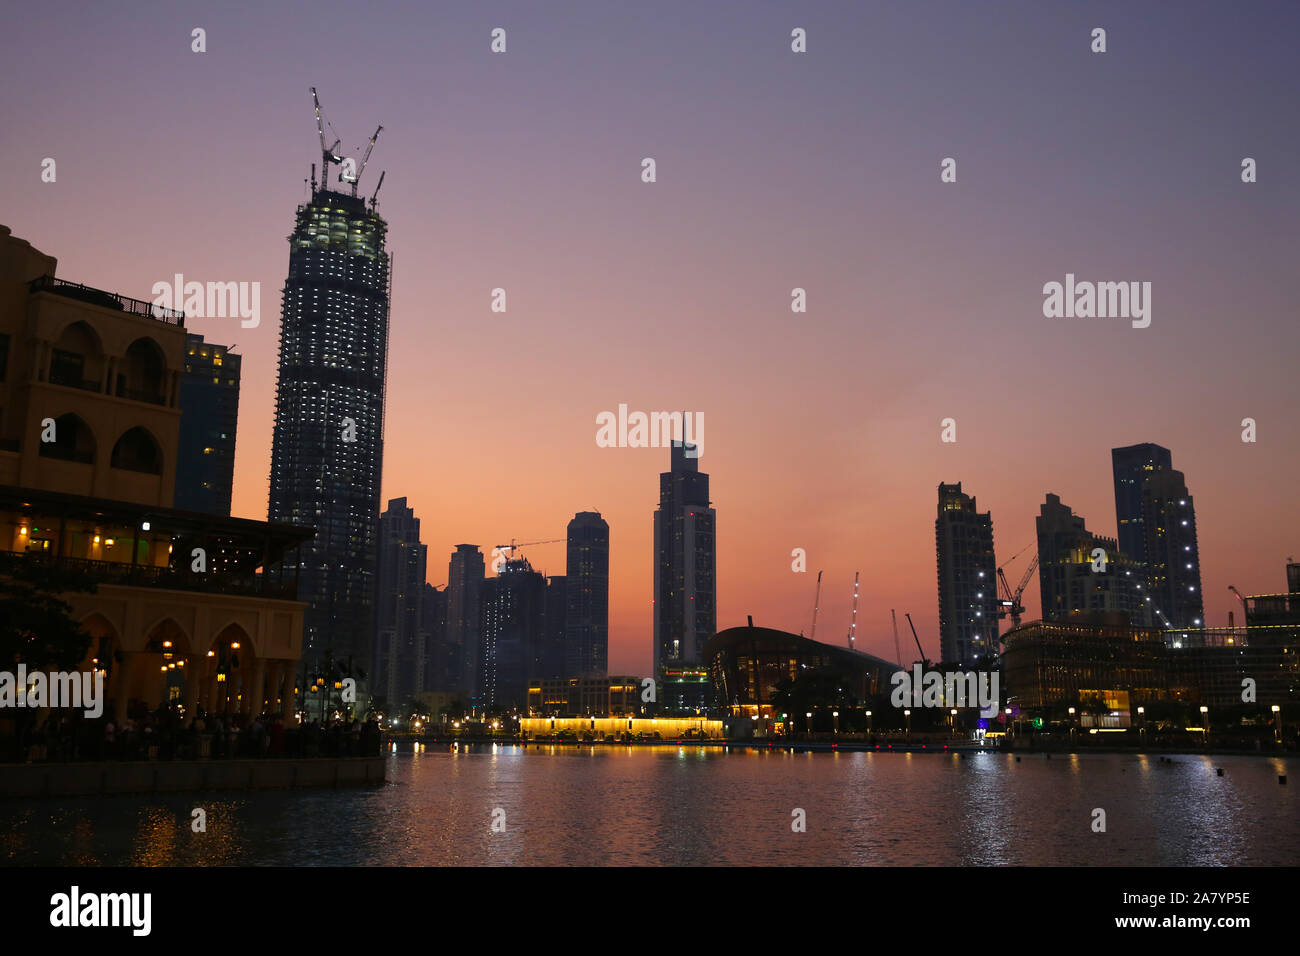 Downtown in the city at sunset with all the skyscrappers illluminated and reflecting in the lake, Dubai, United Arab Emirates. Stock Photo